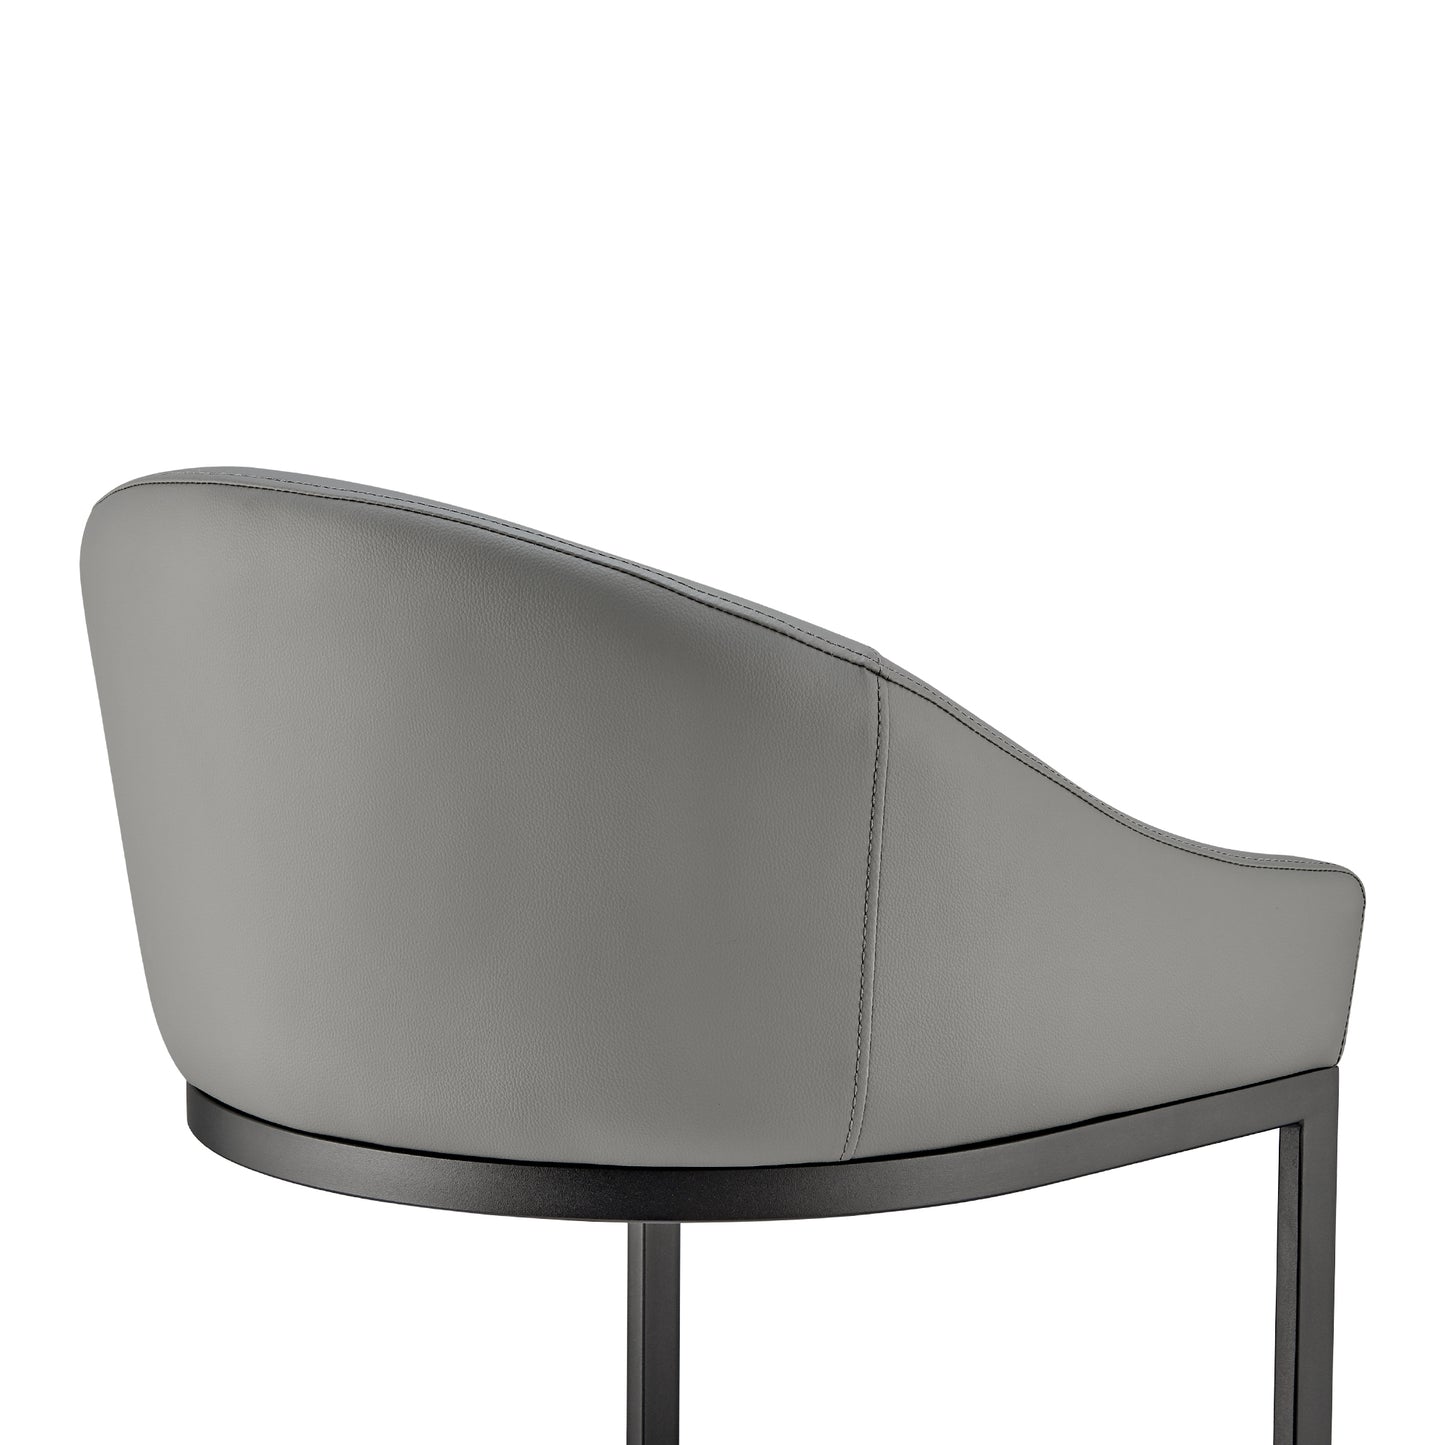 Atherik Counter Stool in Black Metal with Gray Faux Leather